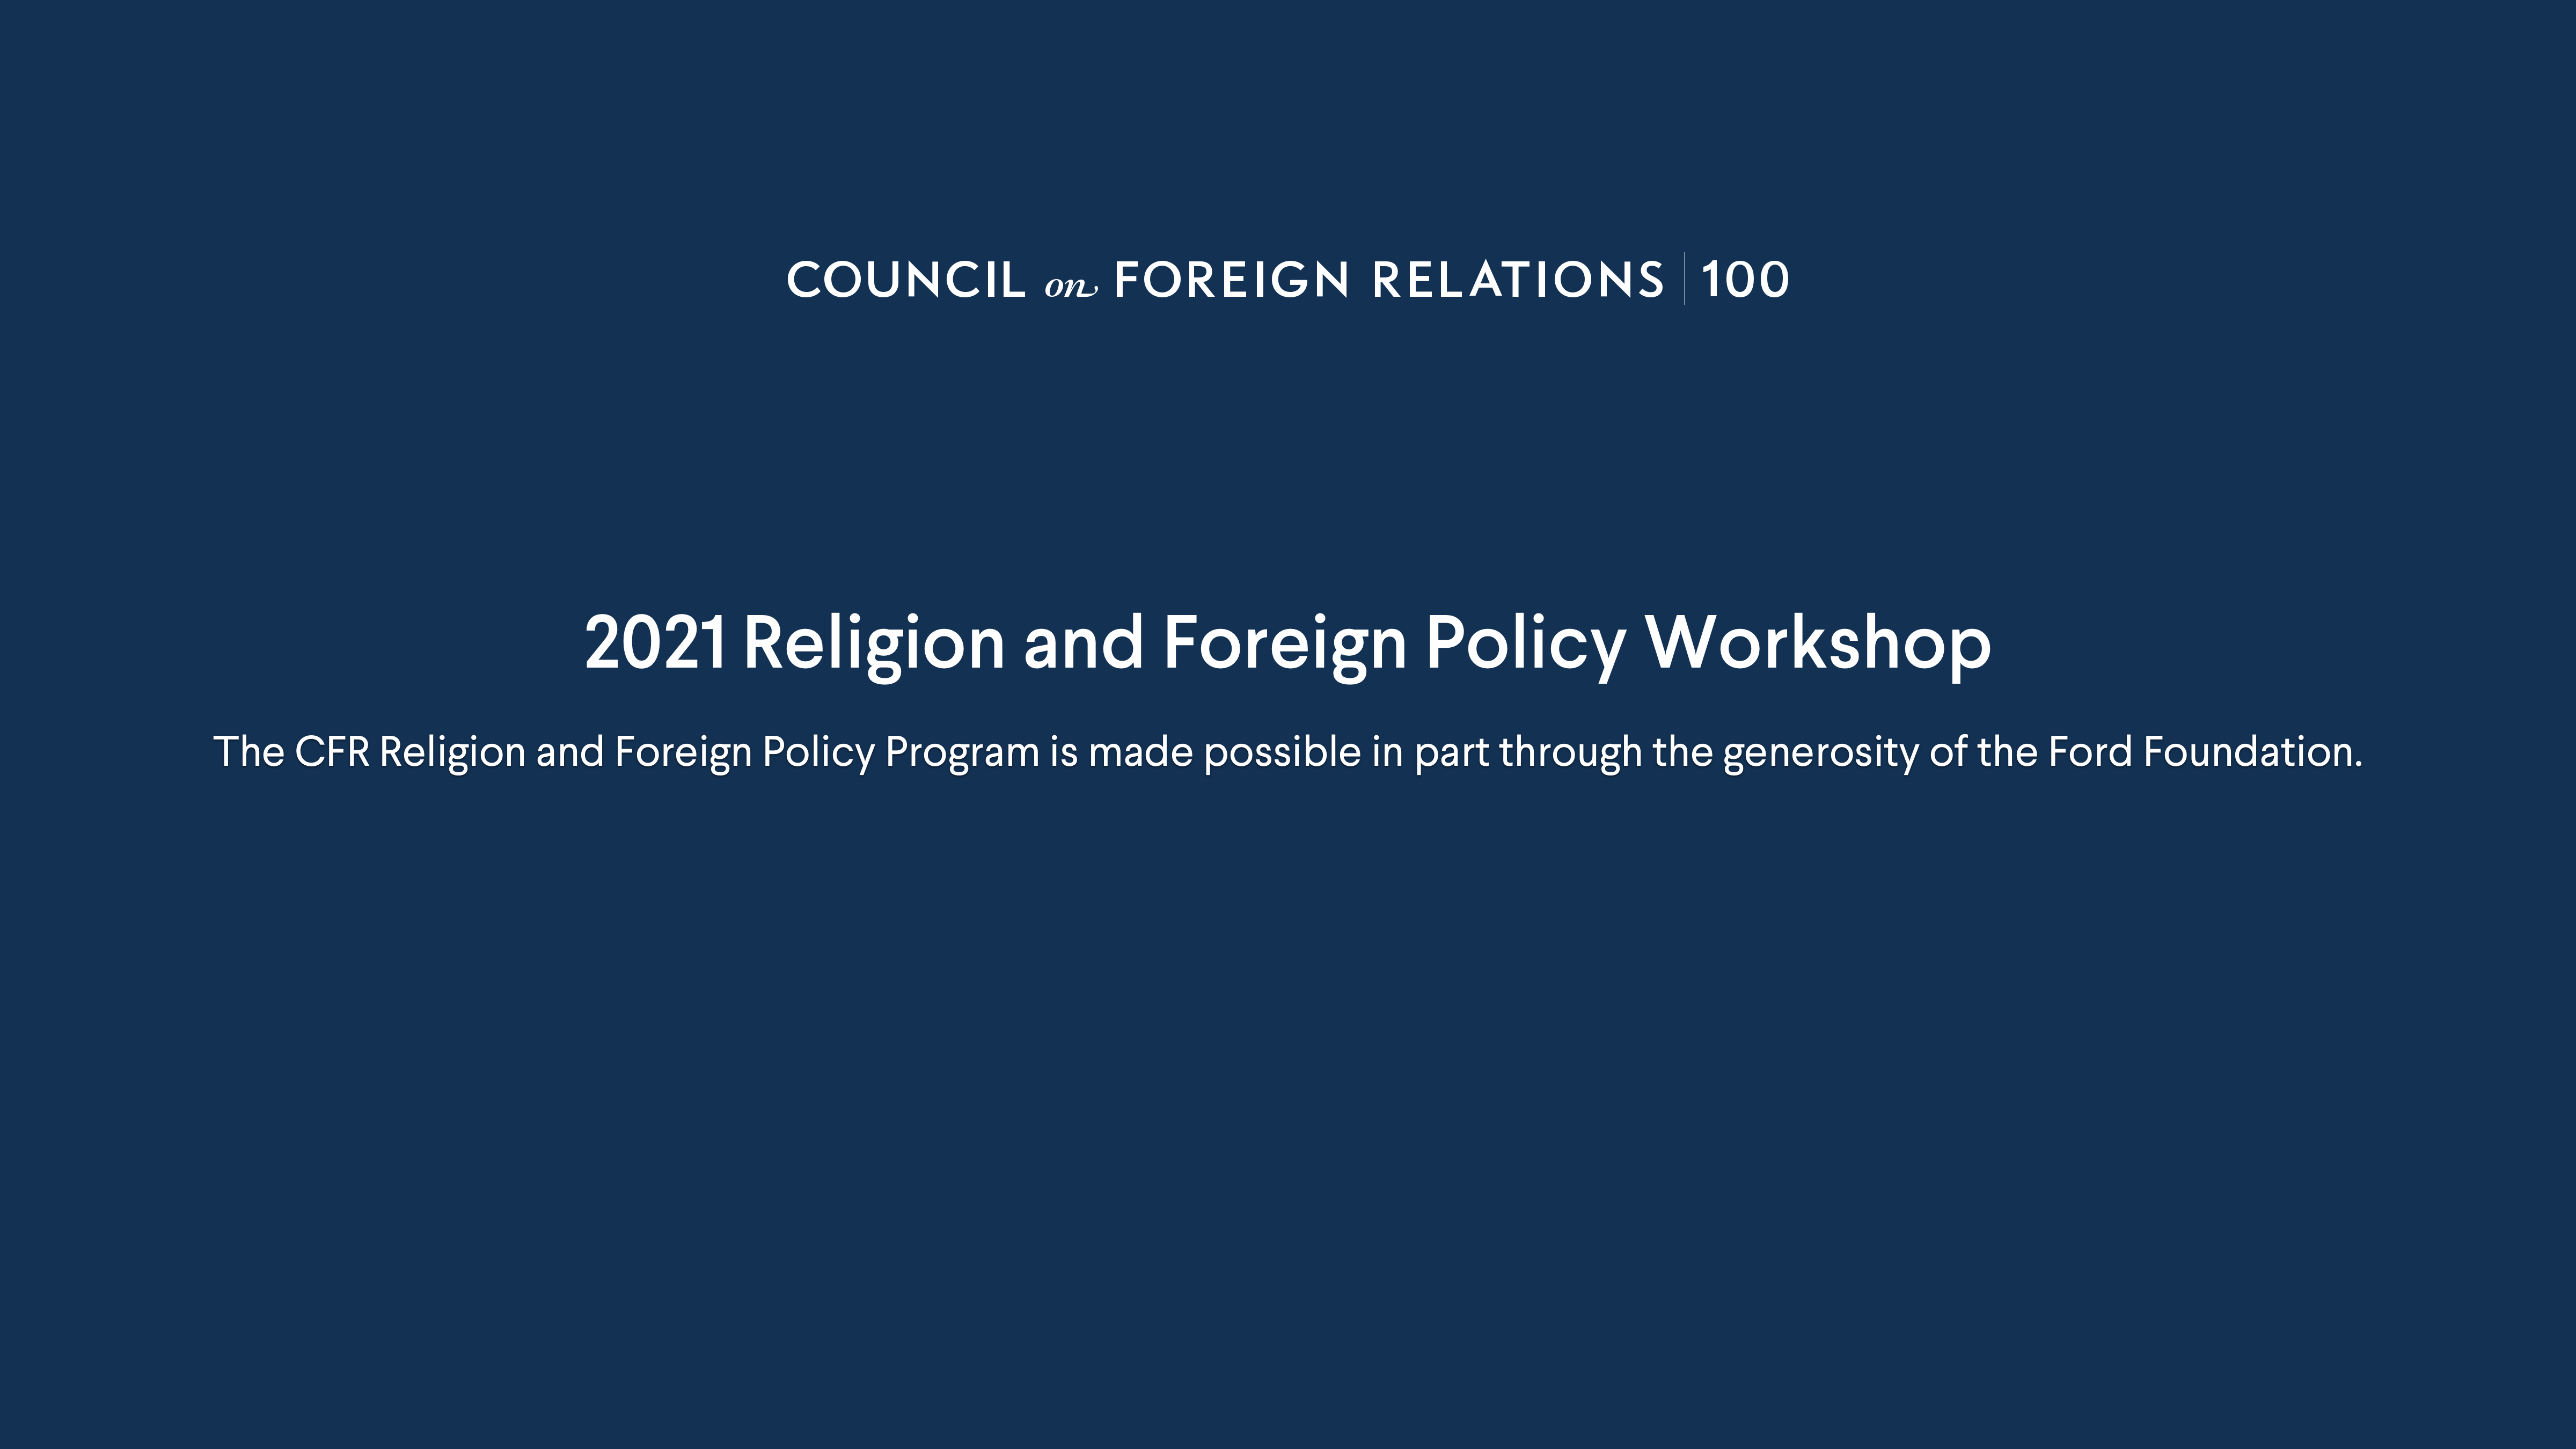 Title for 2021 Religion and Foreign Policy Workshop